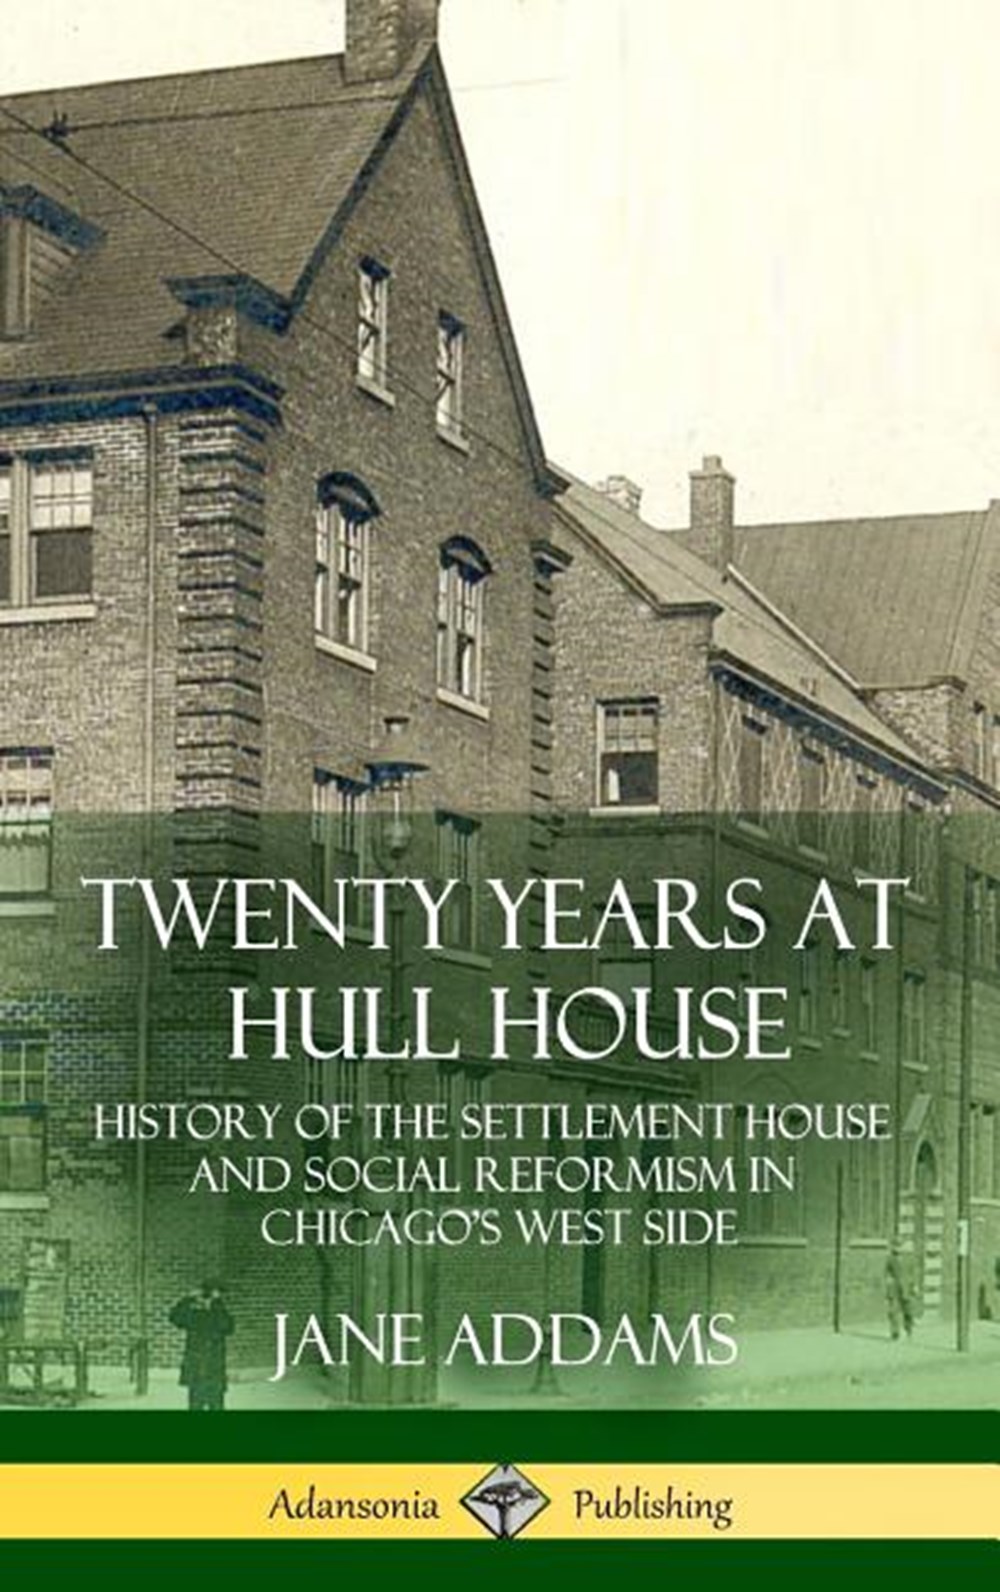 Twenty Years at Hull House: History of the Settlement House and Social Reformism in Chicago's West S